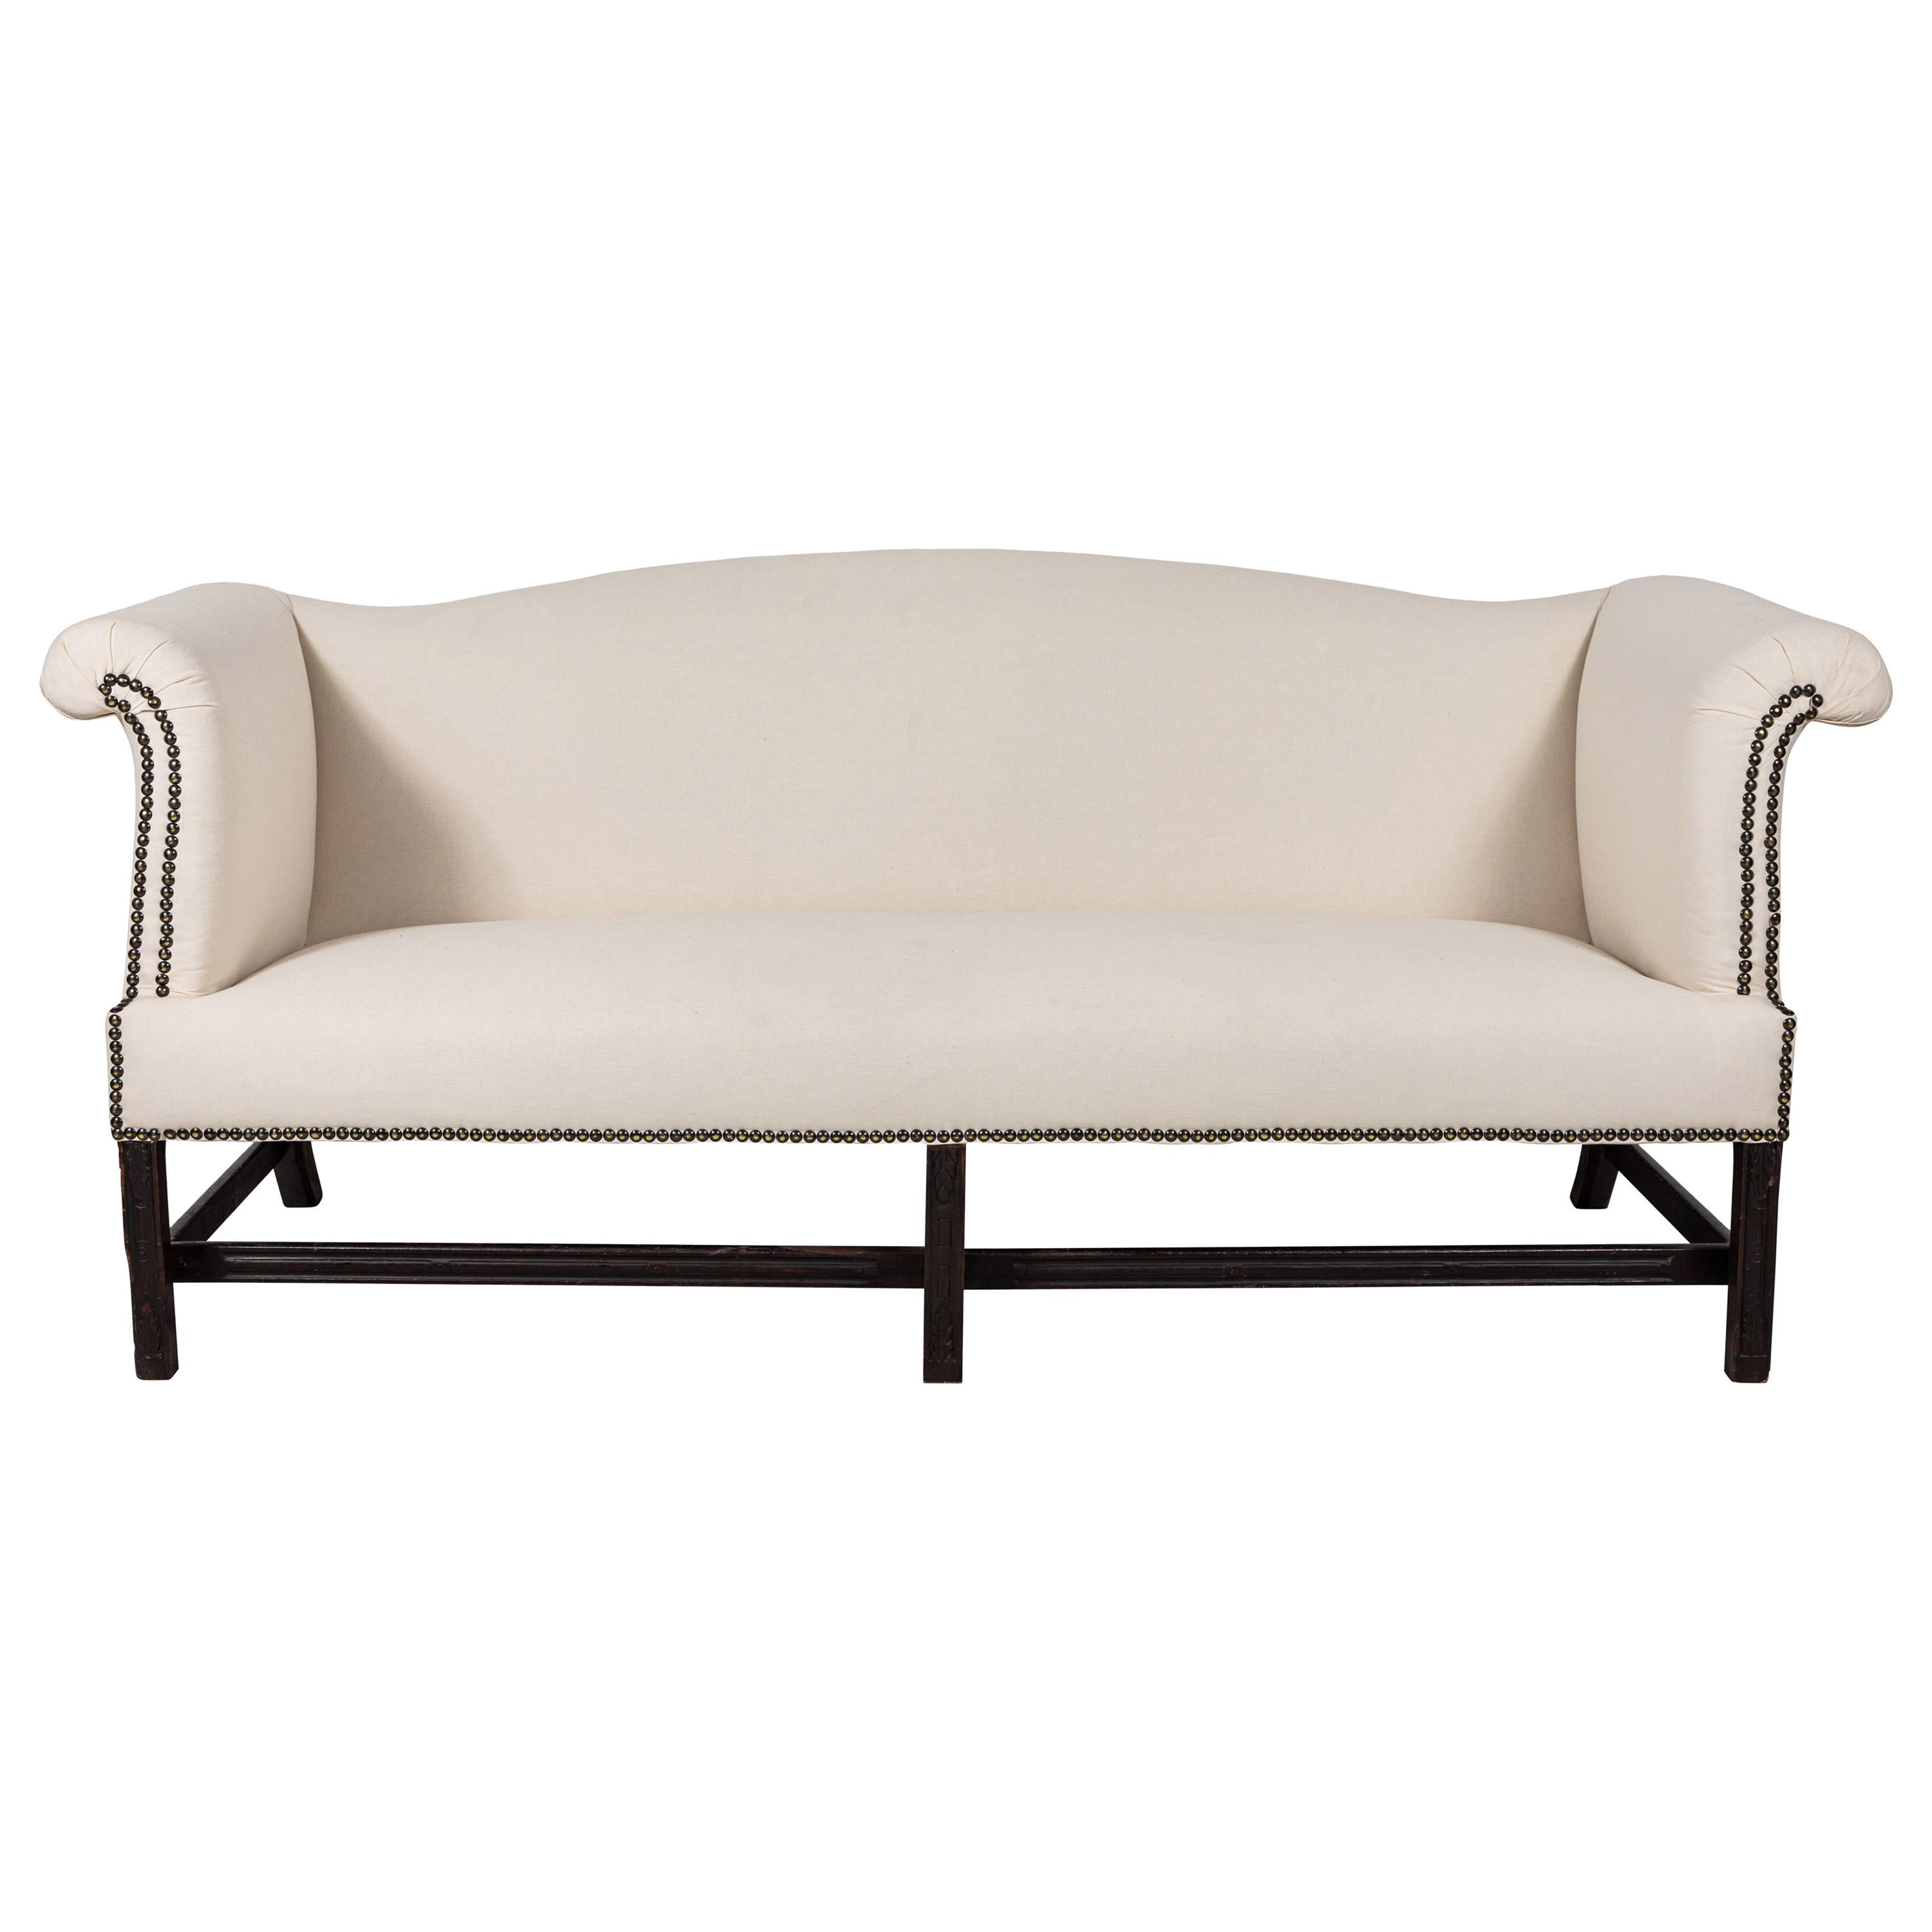 French Muslin Camelback Sofa with Nail Head Details